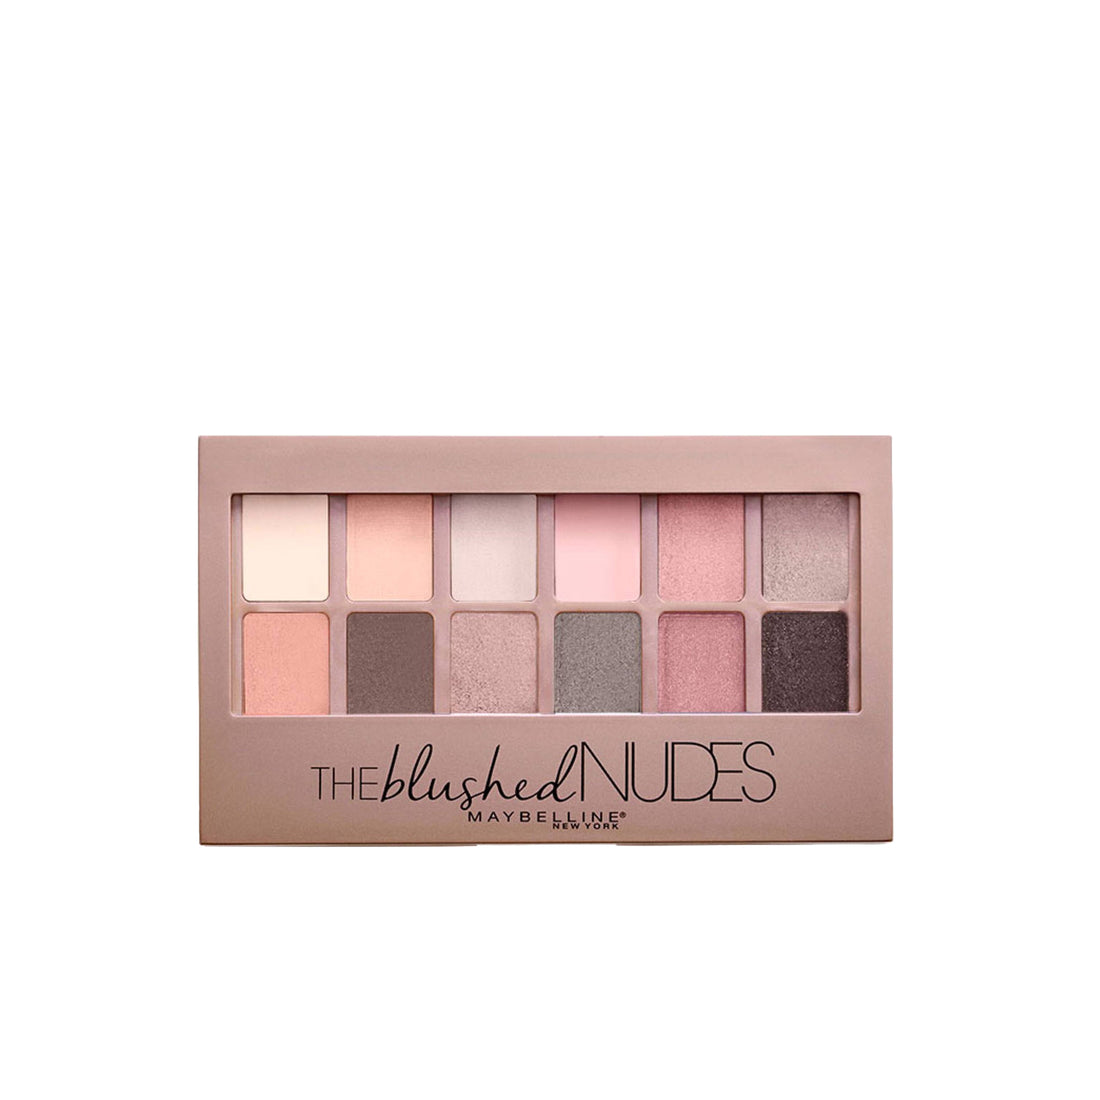 Maybelline The Blushed Nudes Shadow Pallet